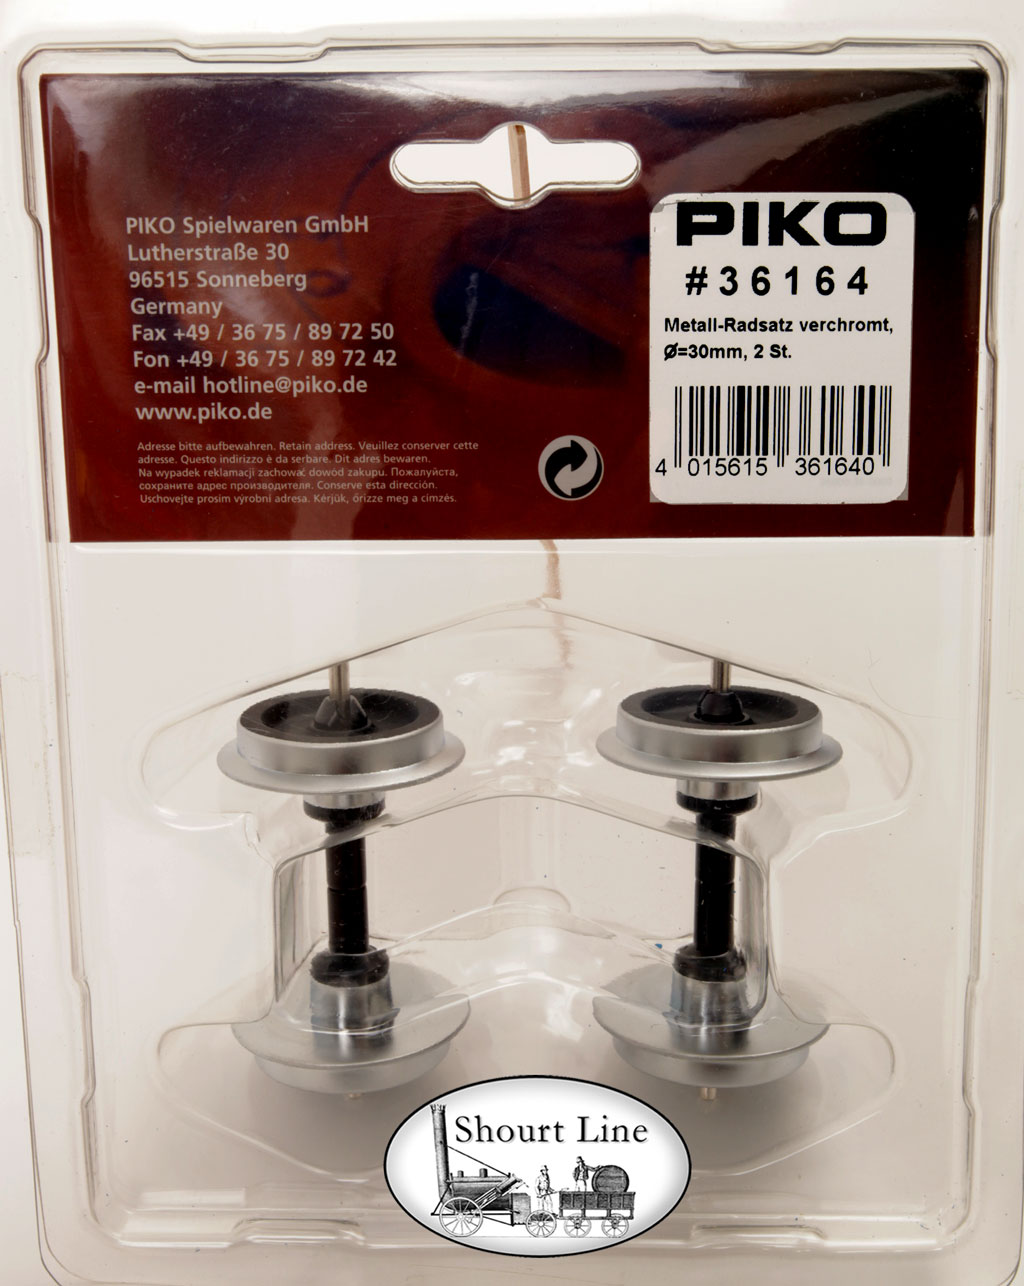 G SCALE LGB OK PIKO 36164 Chrome Plated 30mm Metal Wheelset package back